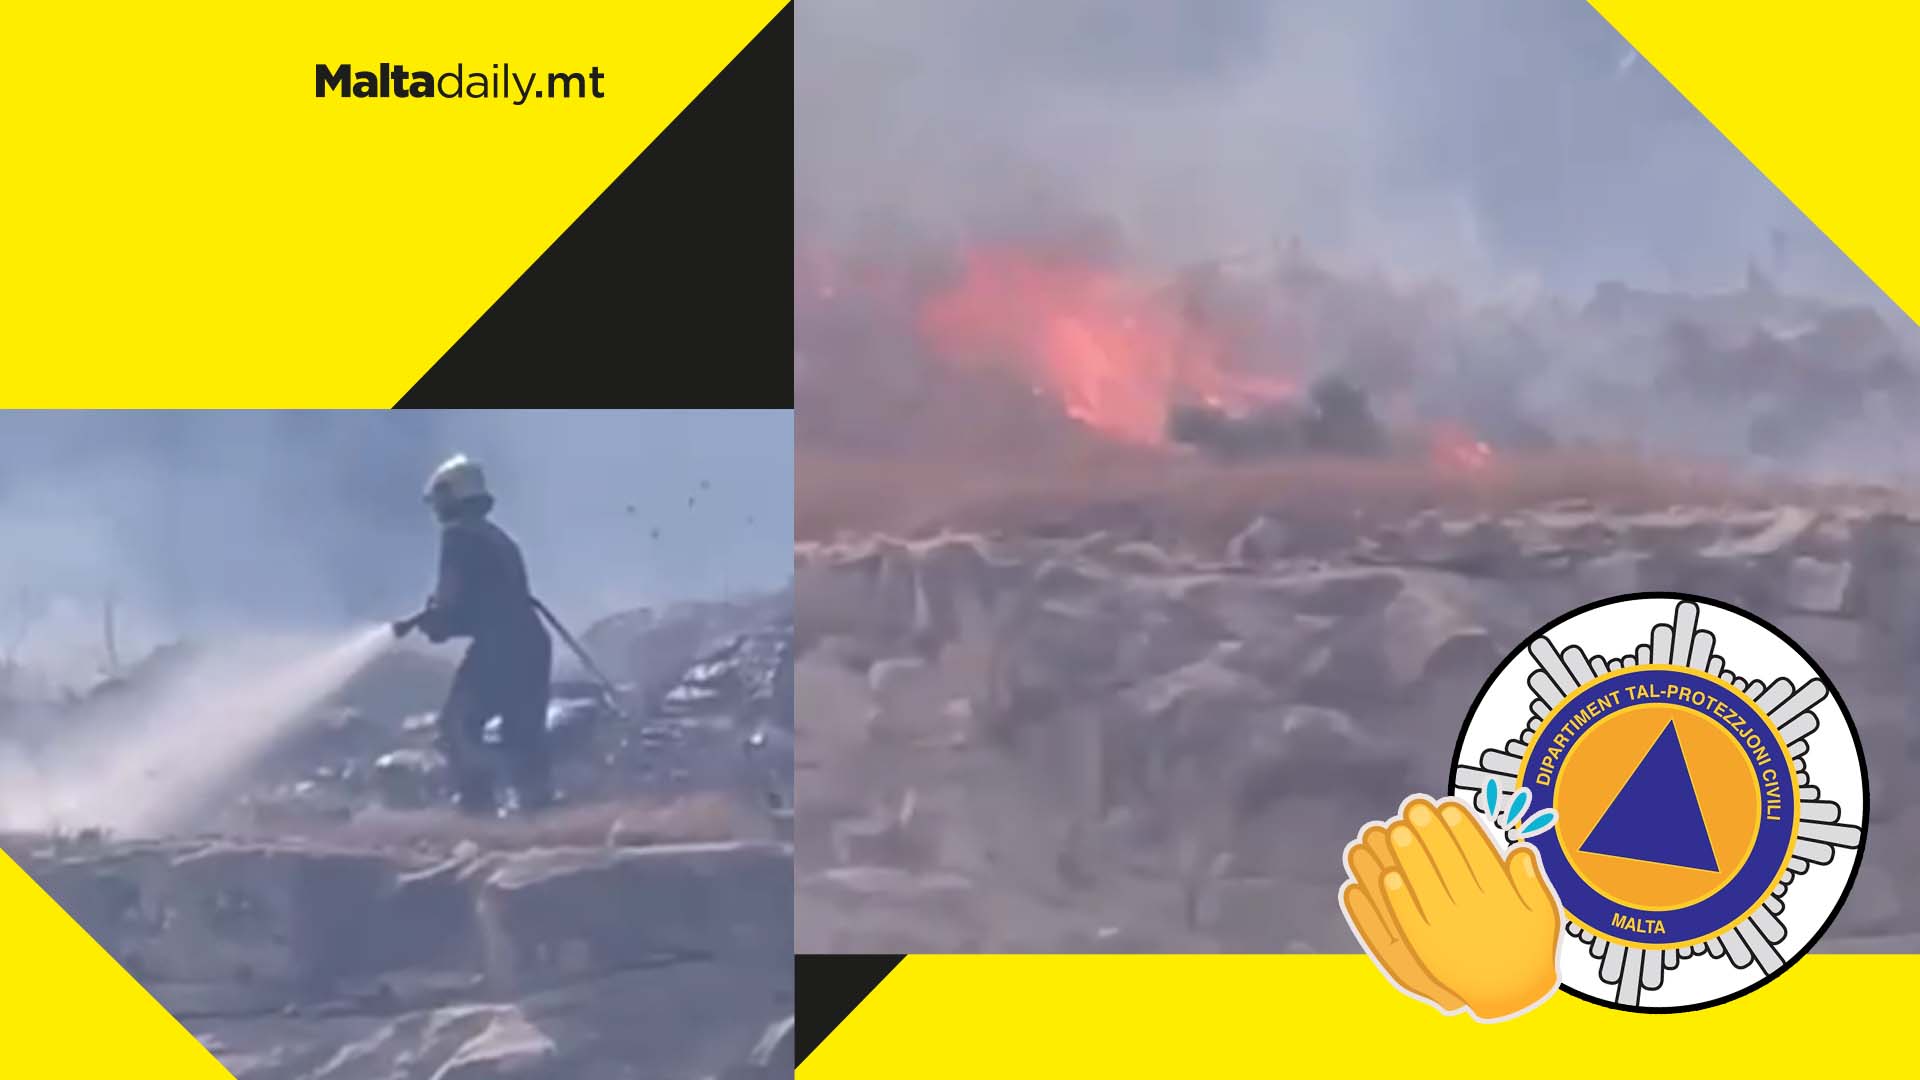 Civil Protection Malta tend to fires all across the island